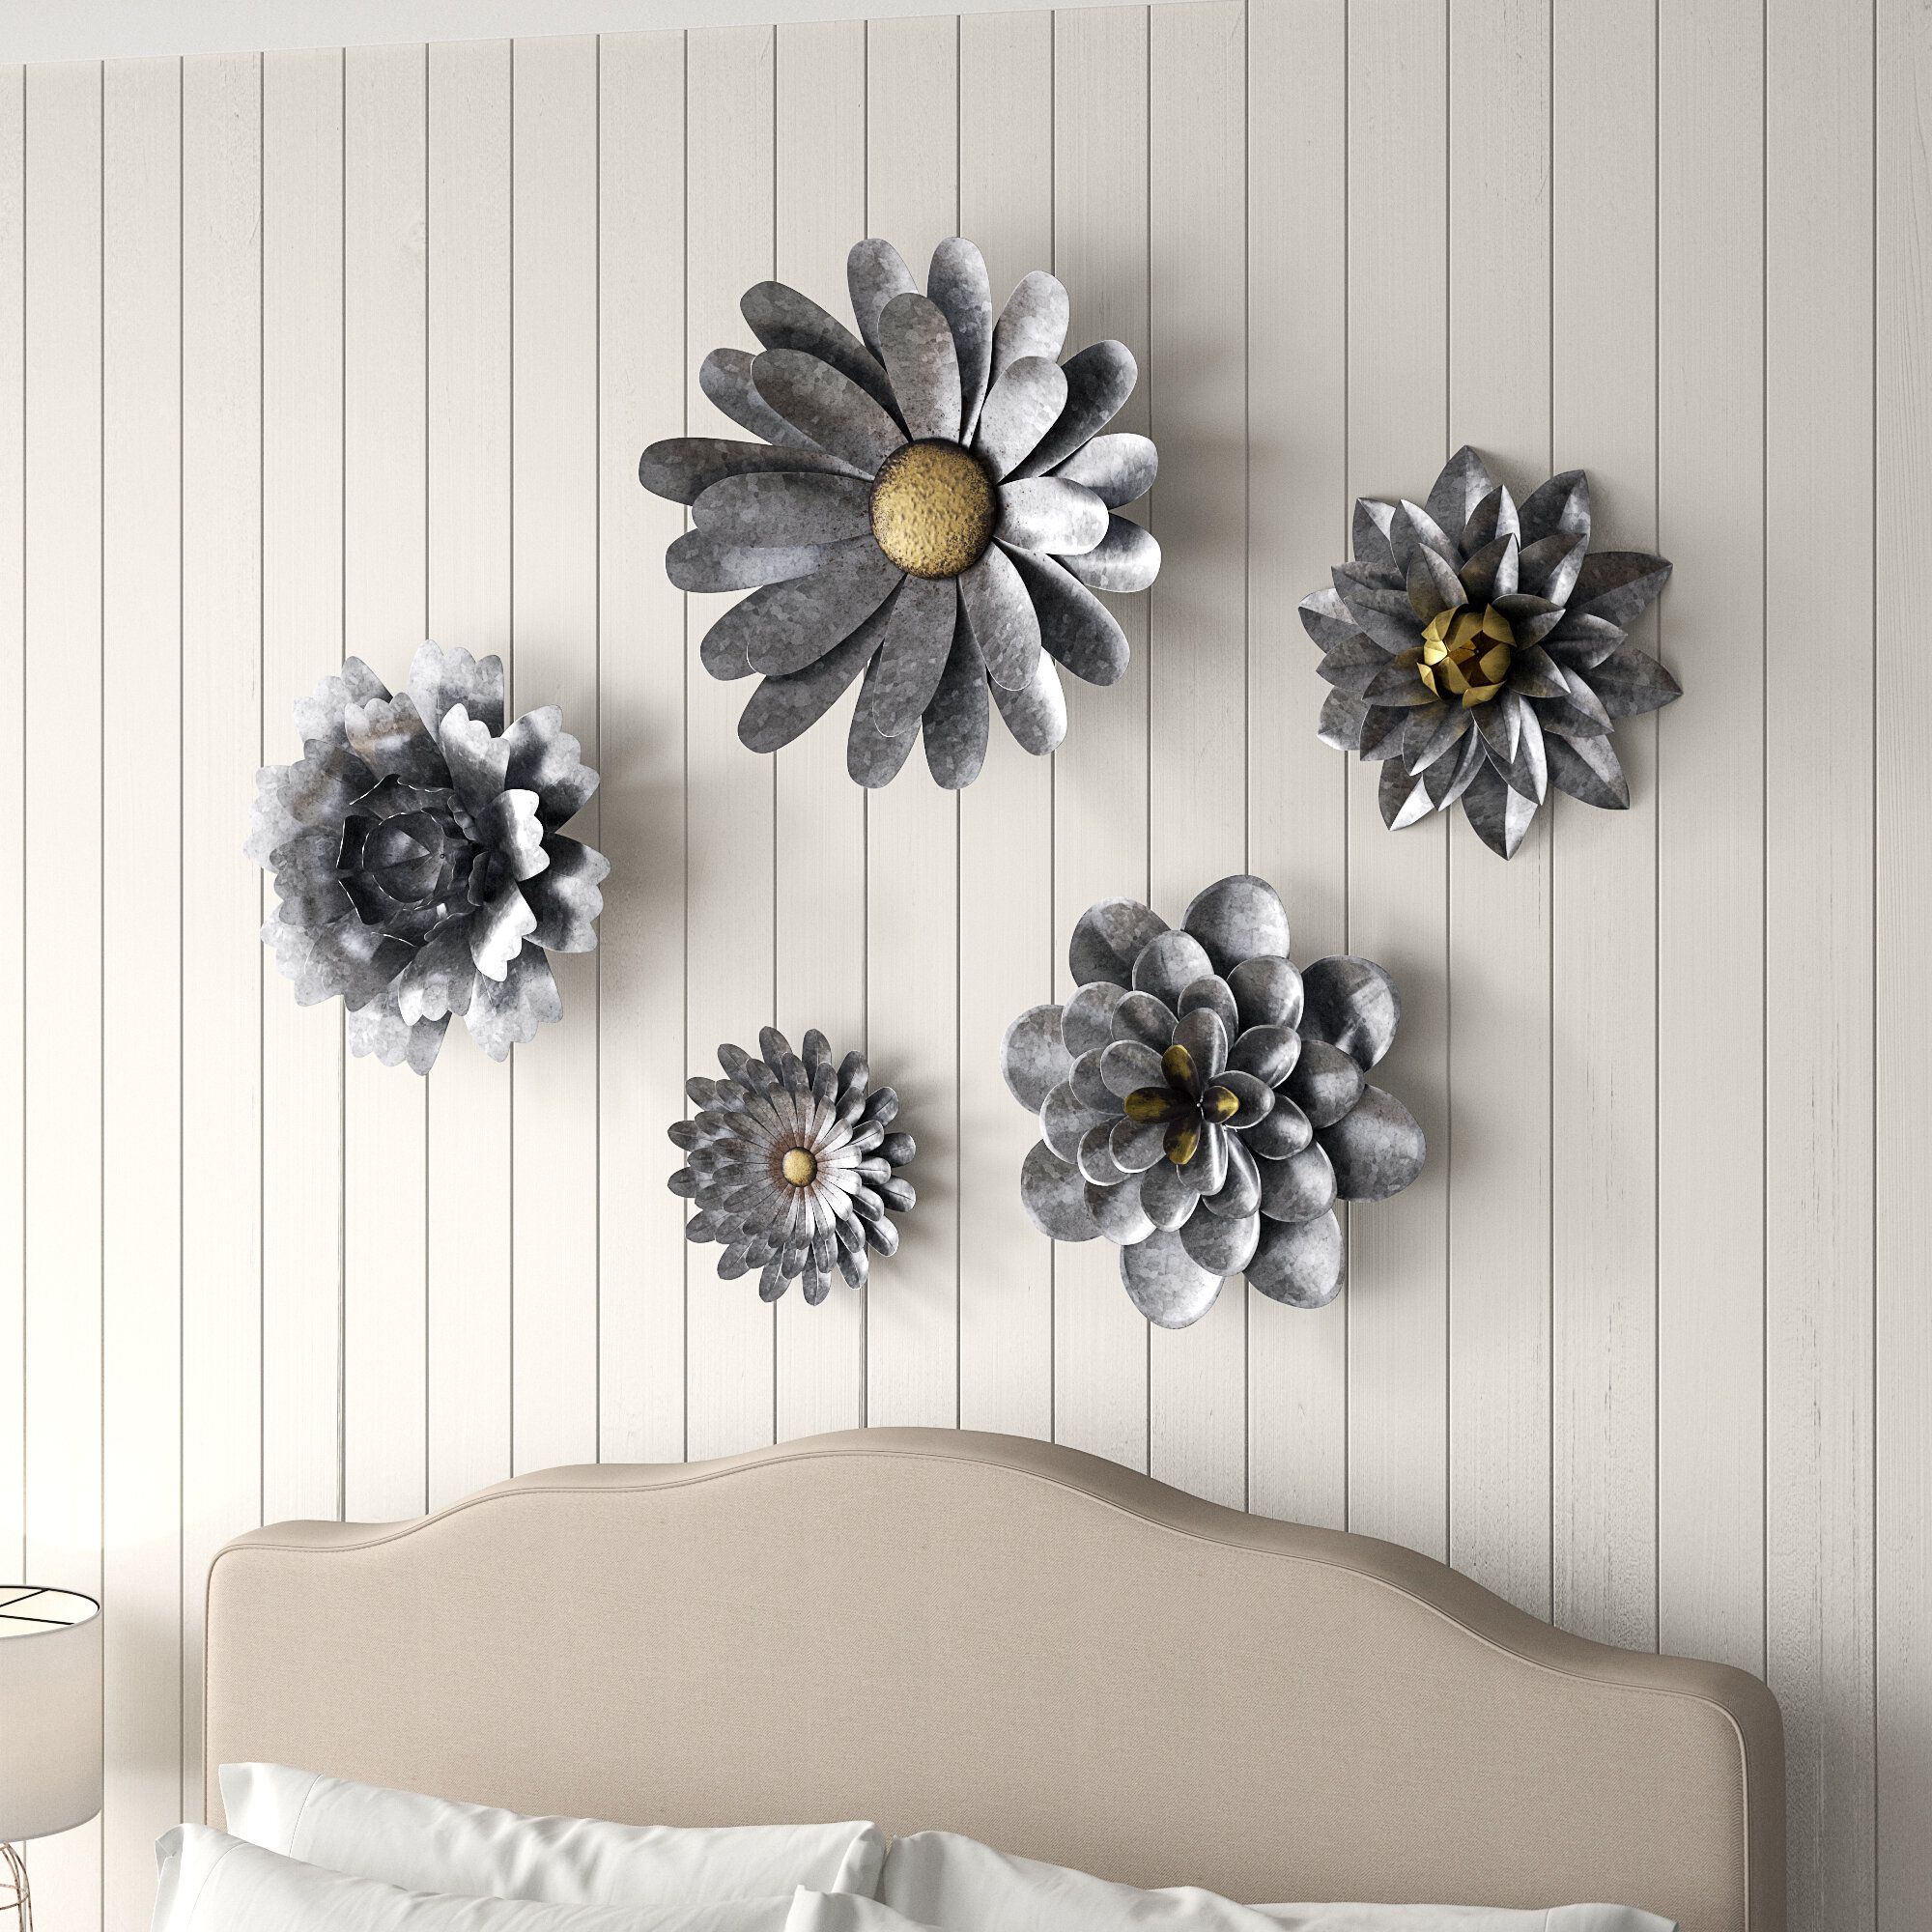 5 Piece Galvanized Metal Flower Hanging Wall Décor Set Within 2 Piece Multiple Layer Metal Flower Wall Decor Sets (View 2 of 30)